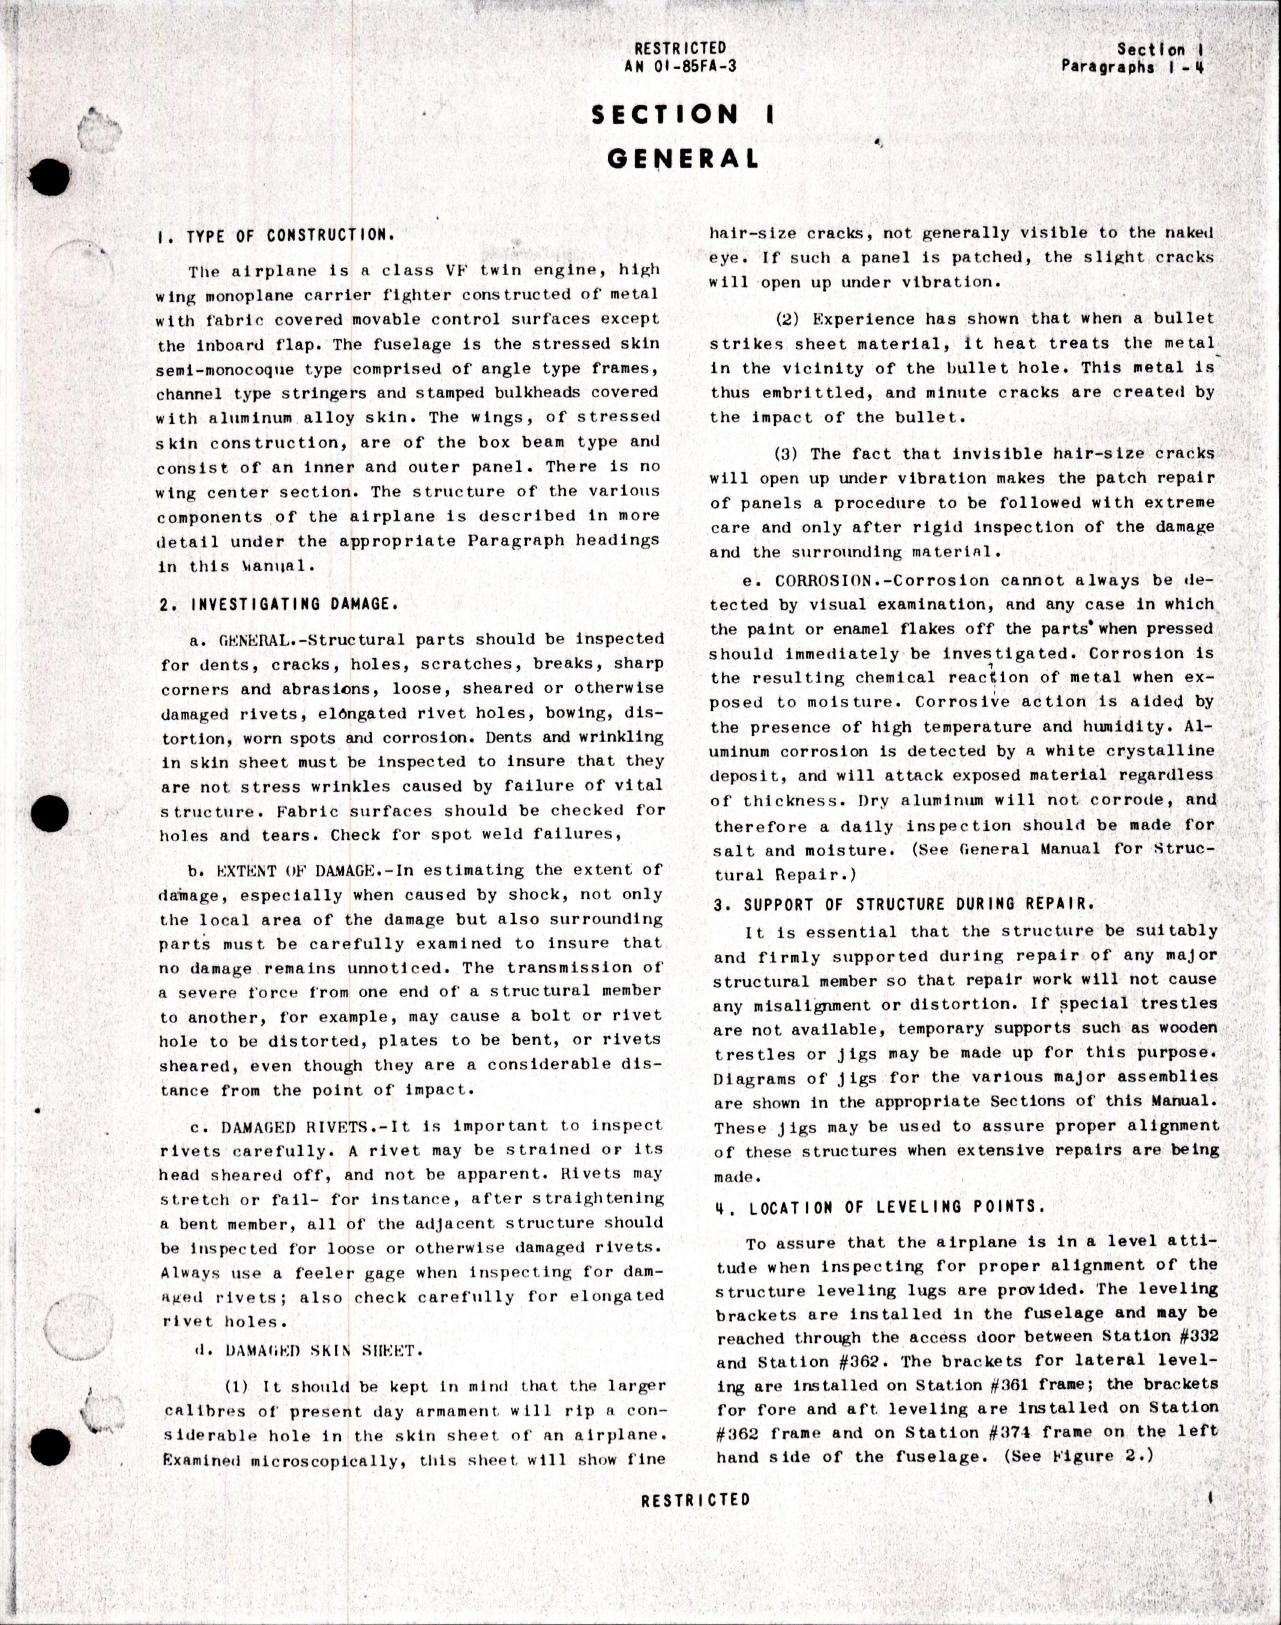 Sample page 8 from AirCorps Library document: Structural Repair Instructions for F7F-1N, F7F-2N, F7F-3, F7F-3N, and F7F-4N